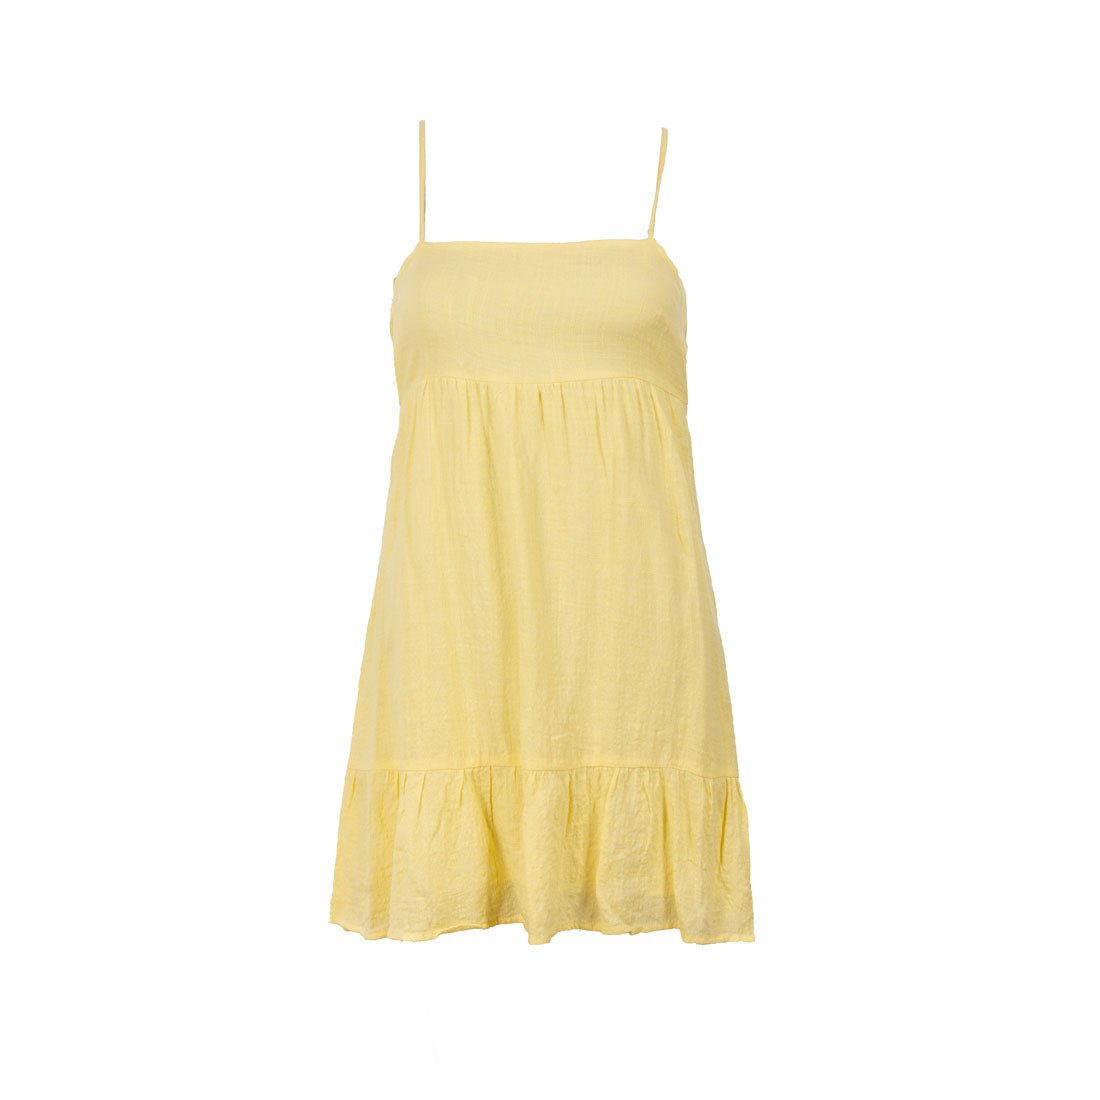 Pull and Bear Dress For Girls - mymadstore.com